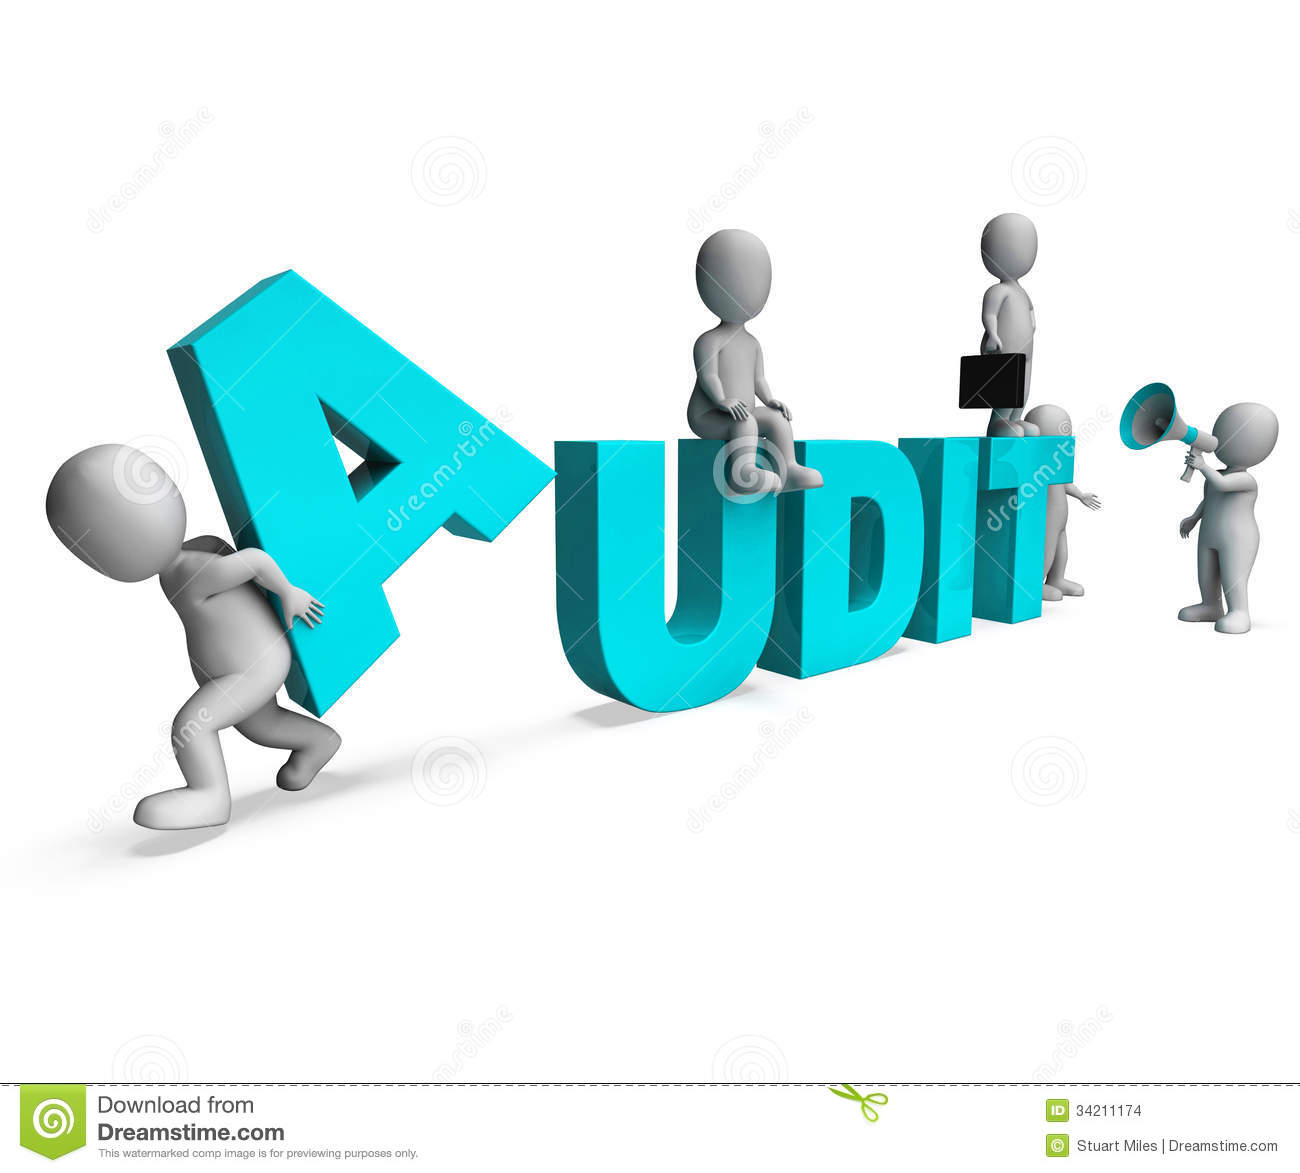 Auditing and Assurance Principles(3117) 9:30-10:30 MWF